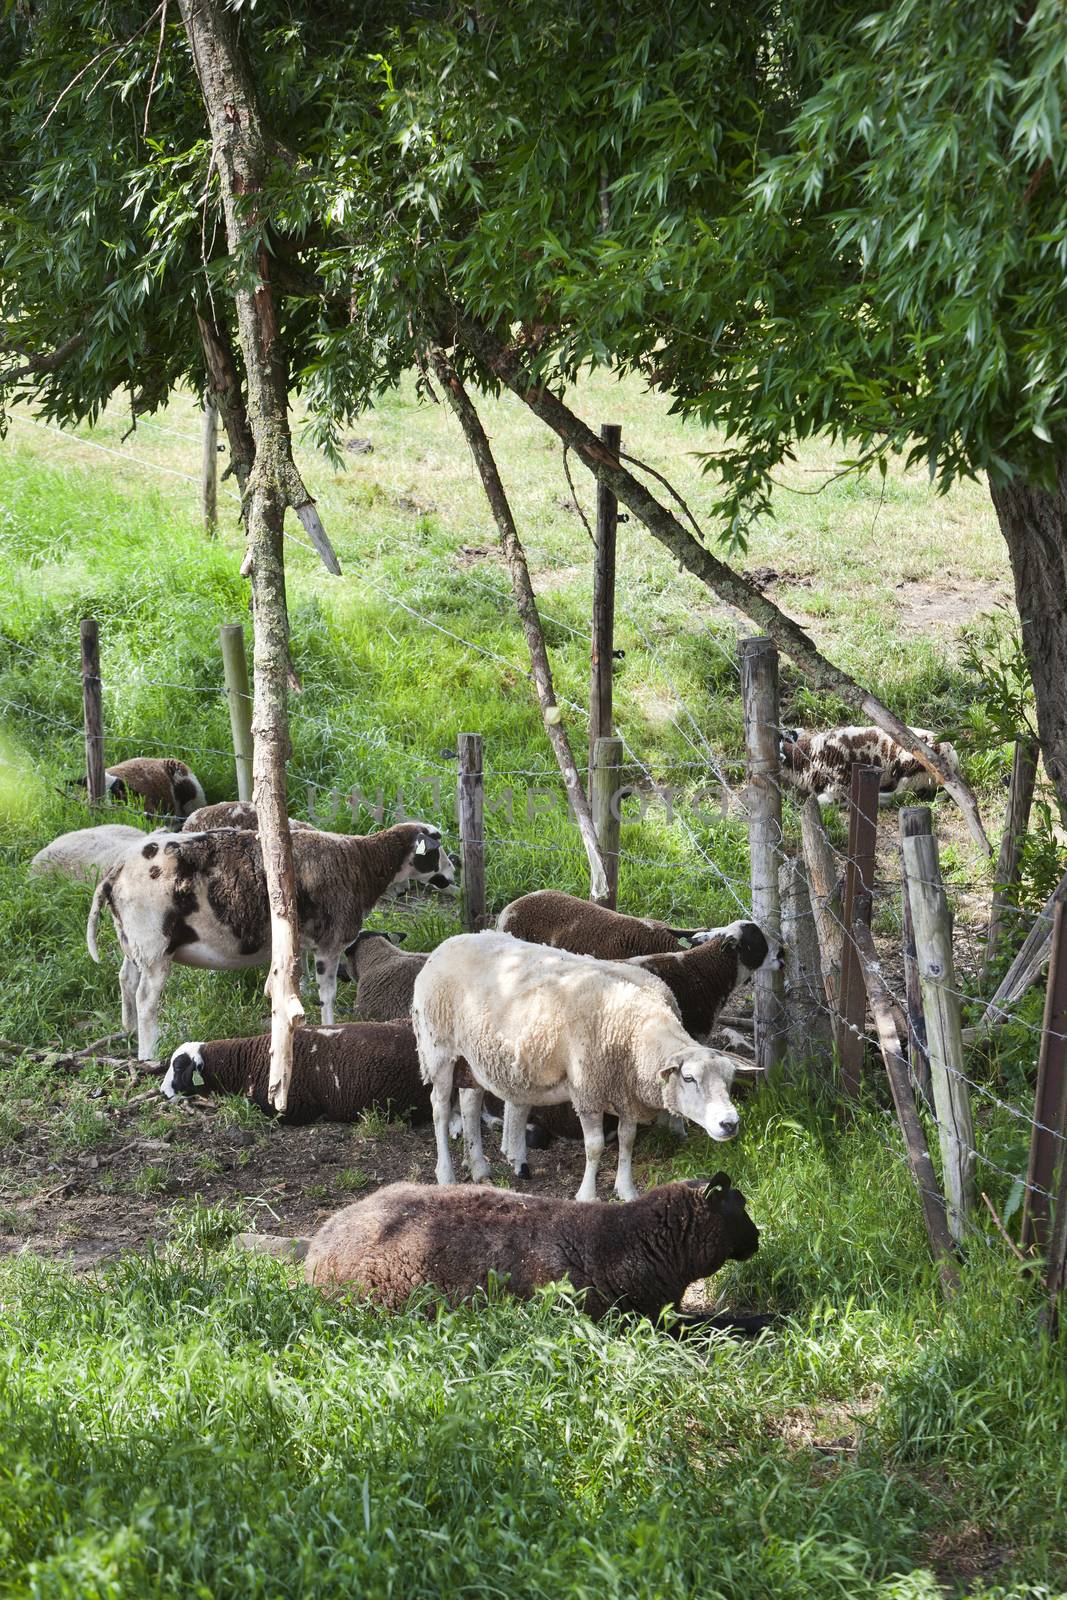 Sheep in the shade under a tree in the countryside of the Netherlands